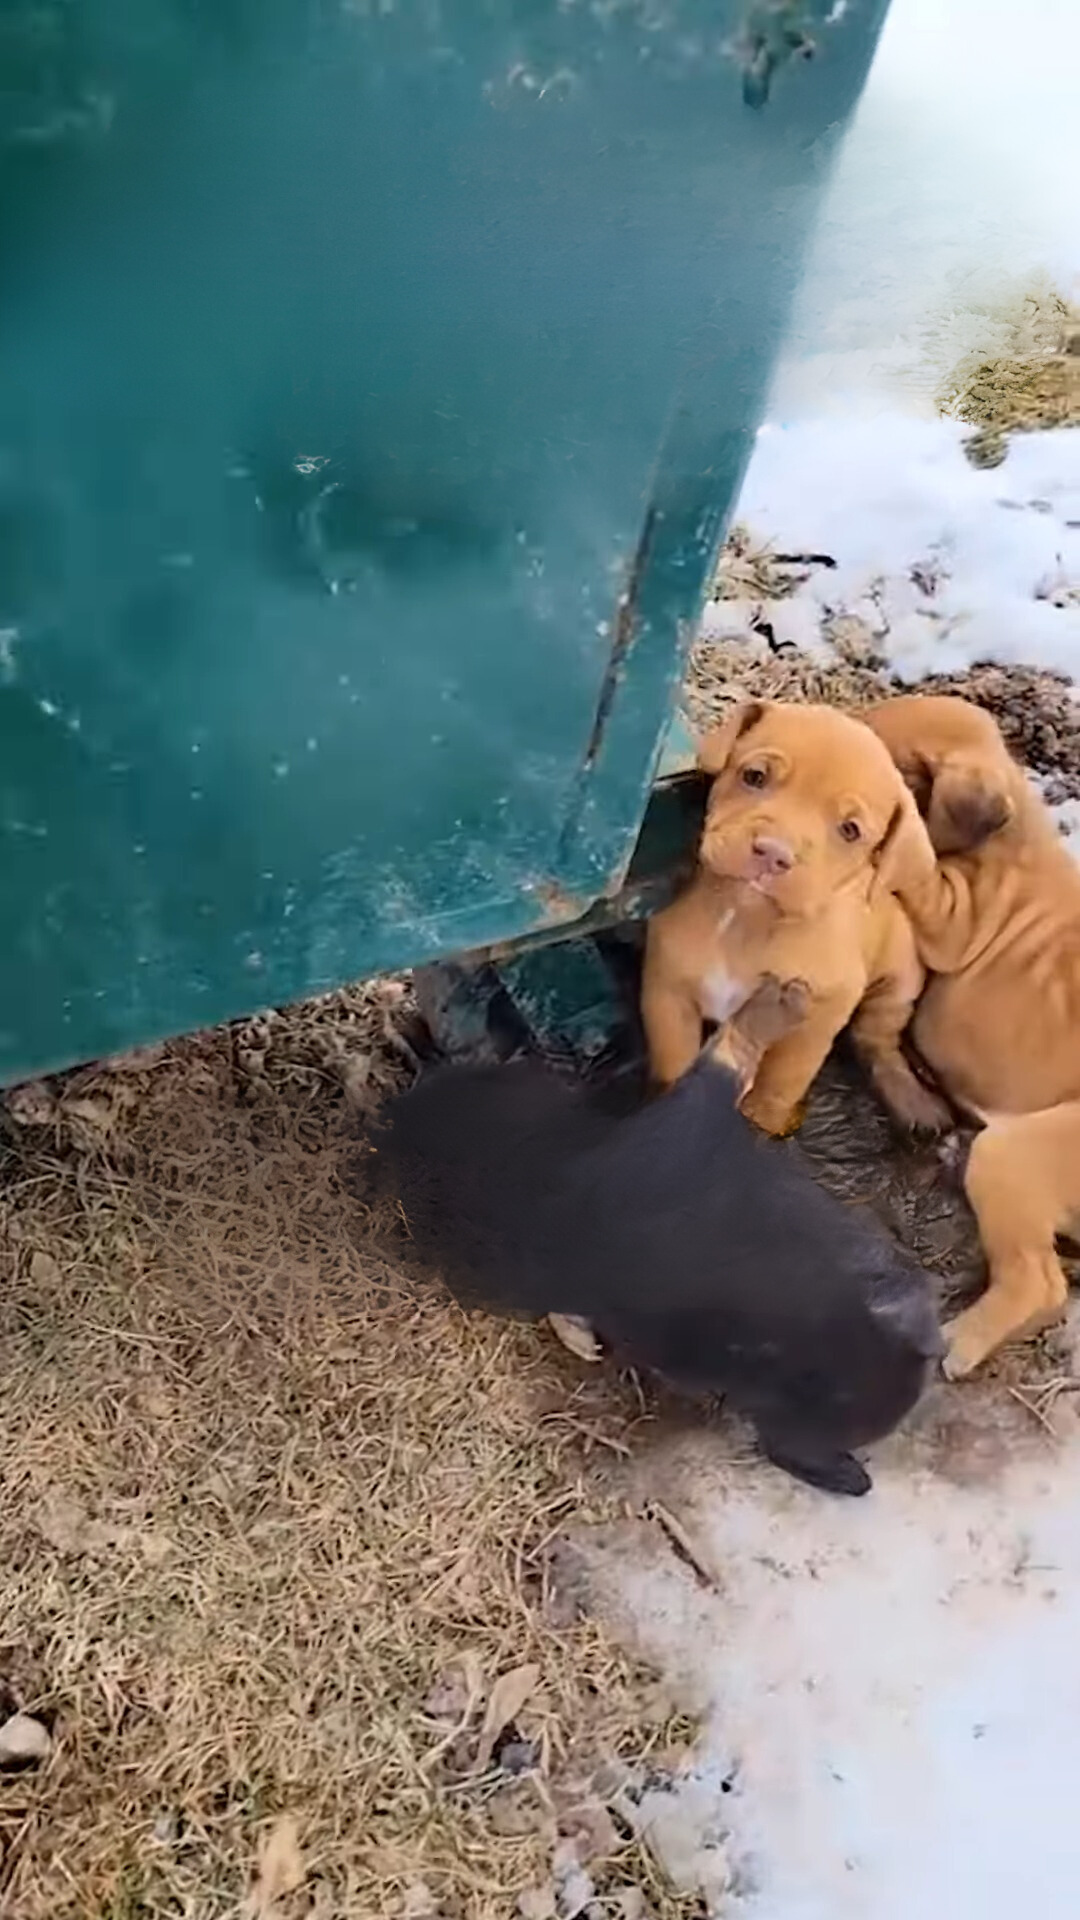 puppies next to a dumpster